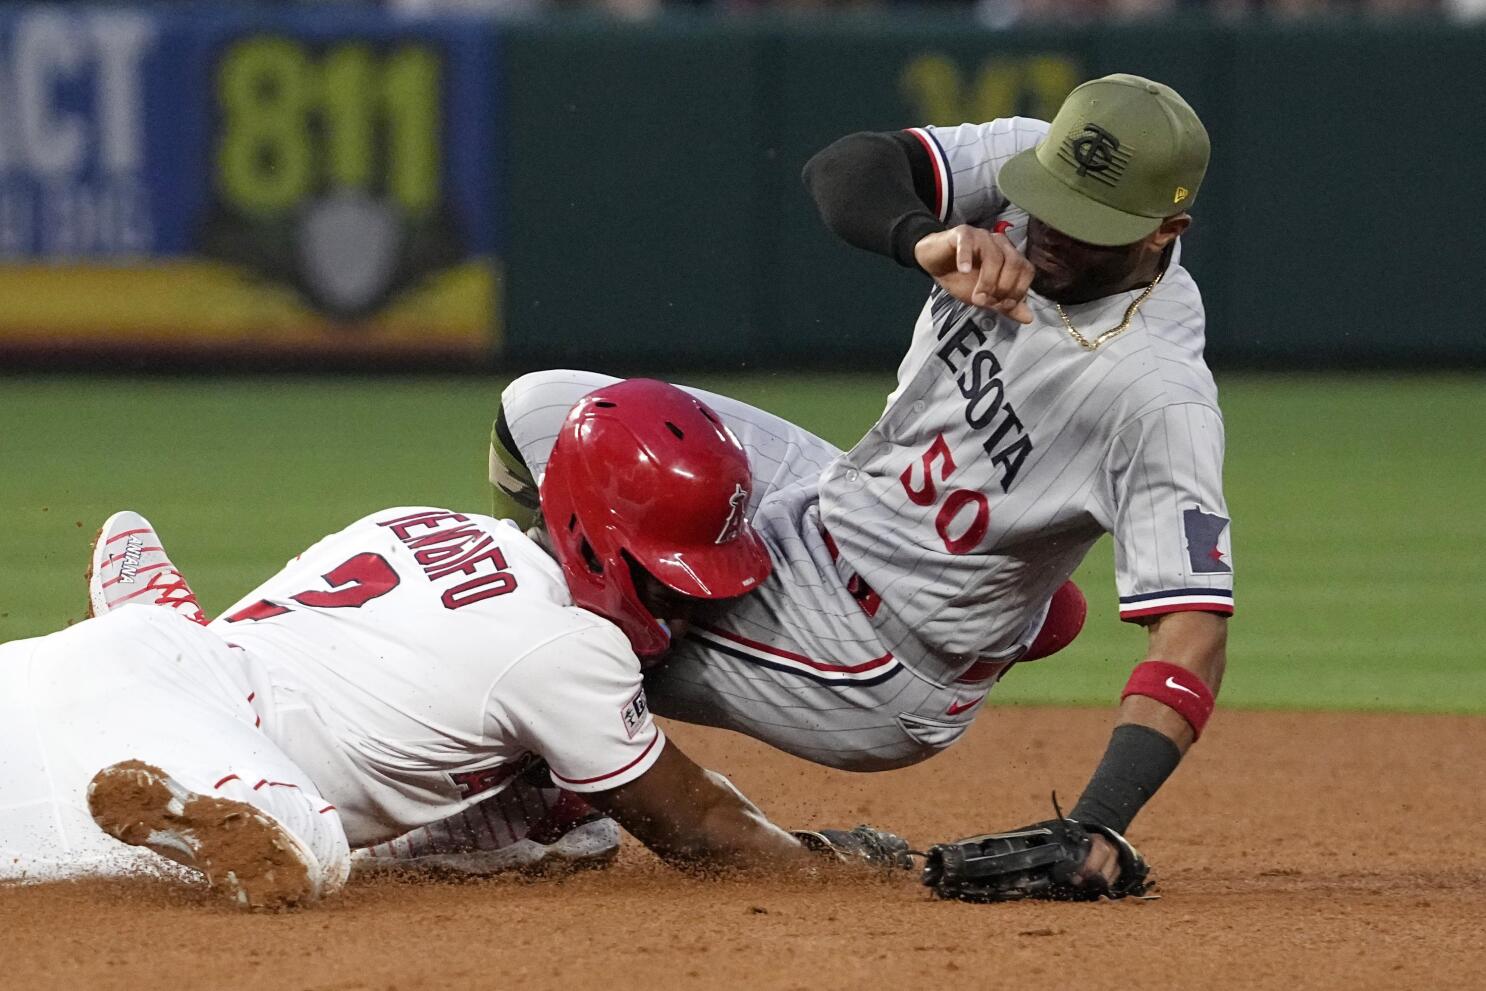 Moniak's 3 hits, defense help Angels rally for a 5-4 victory over Twins